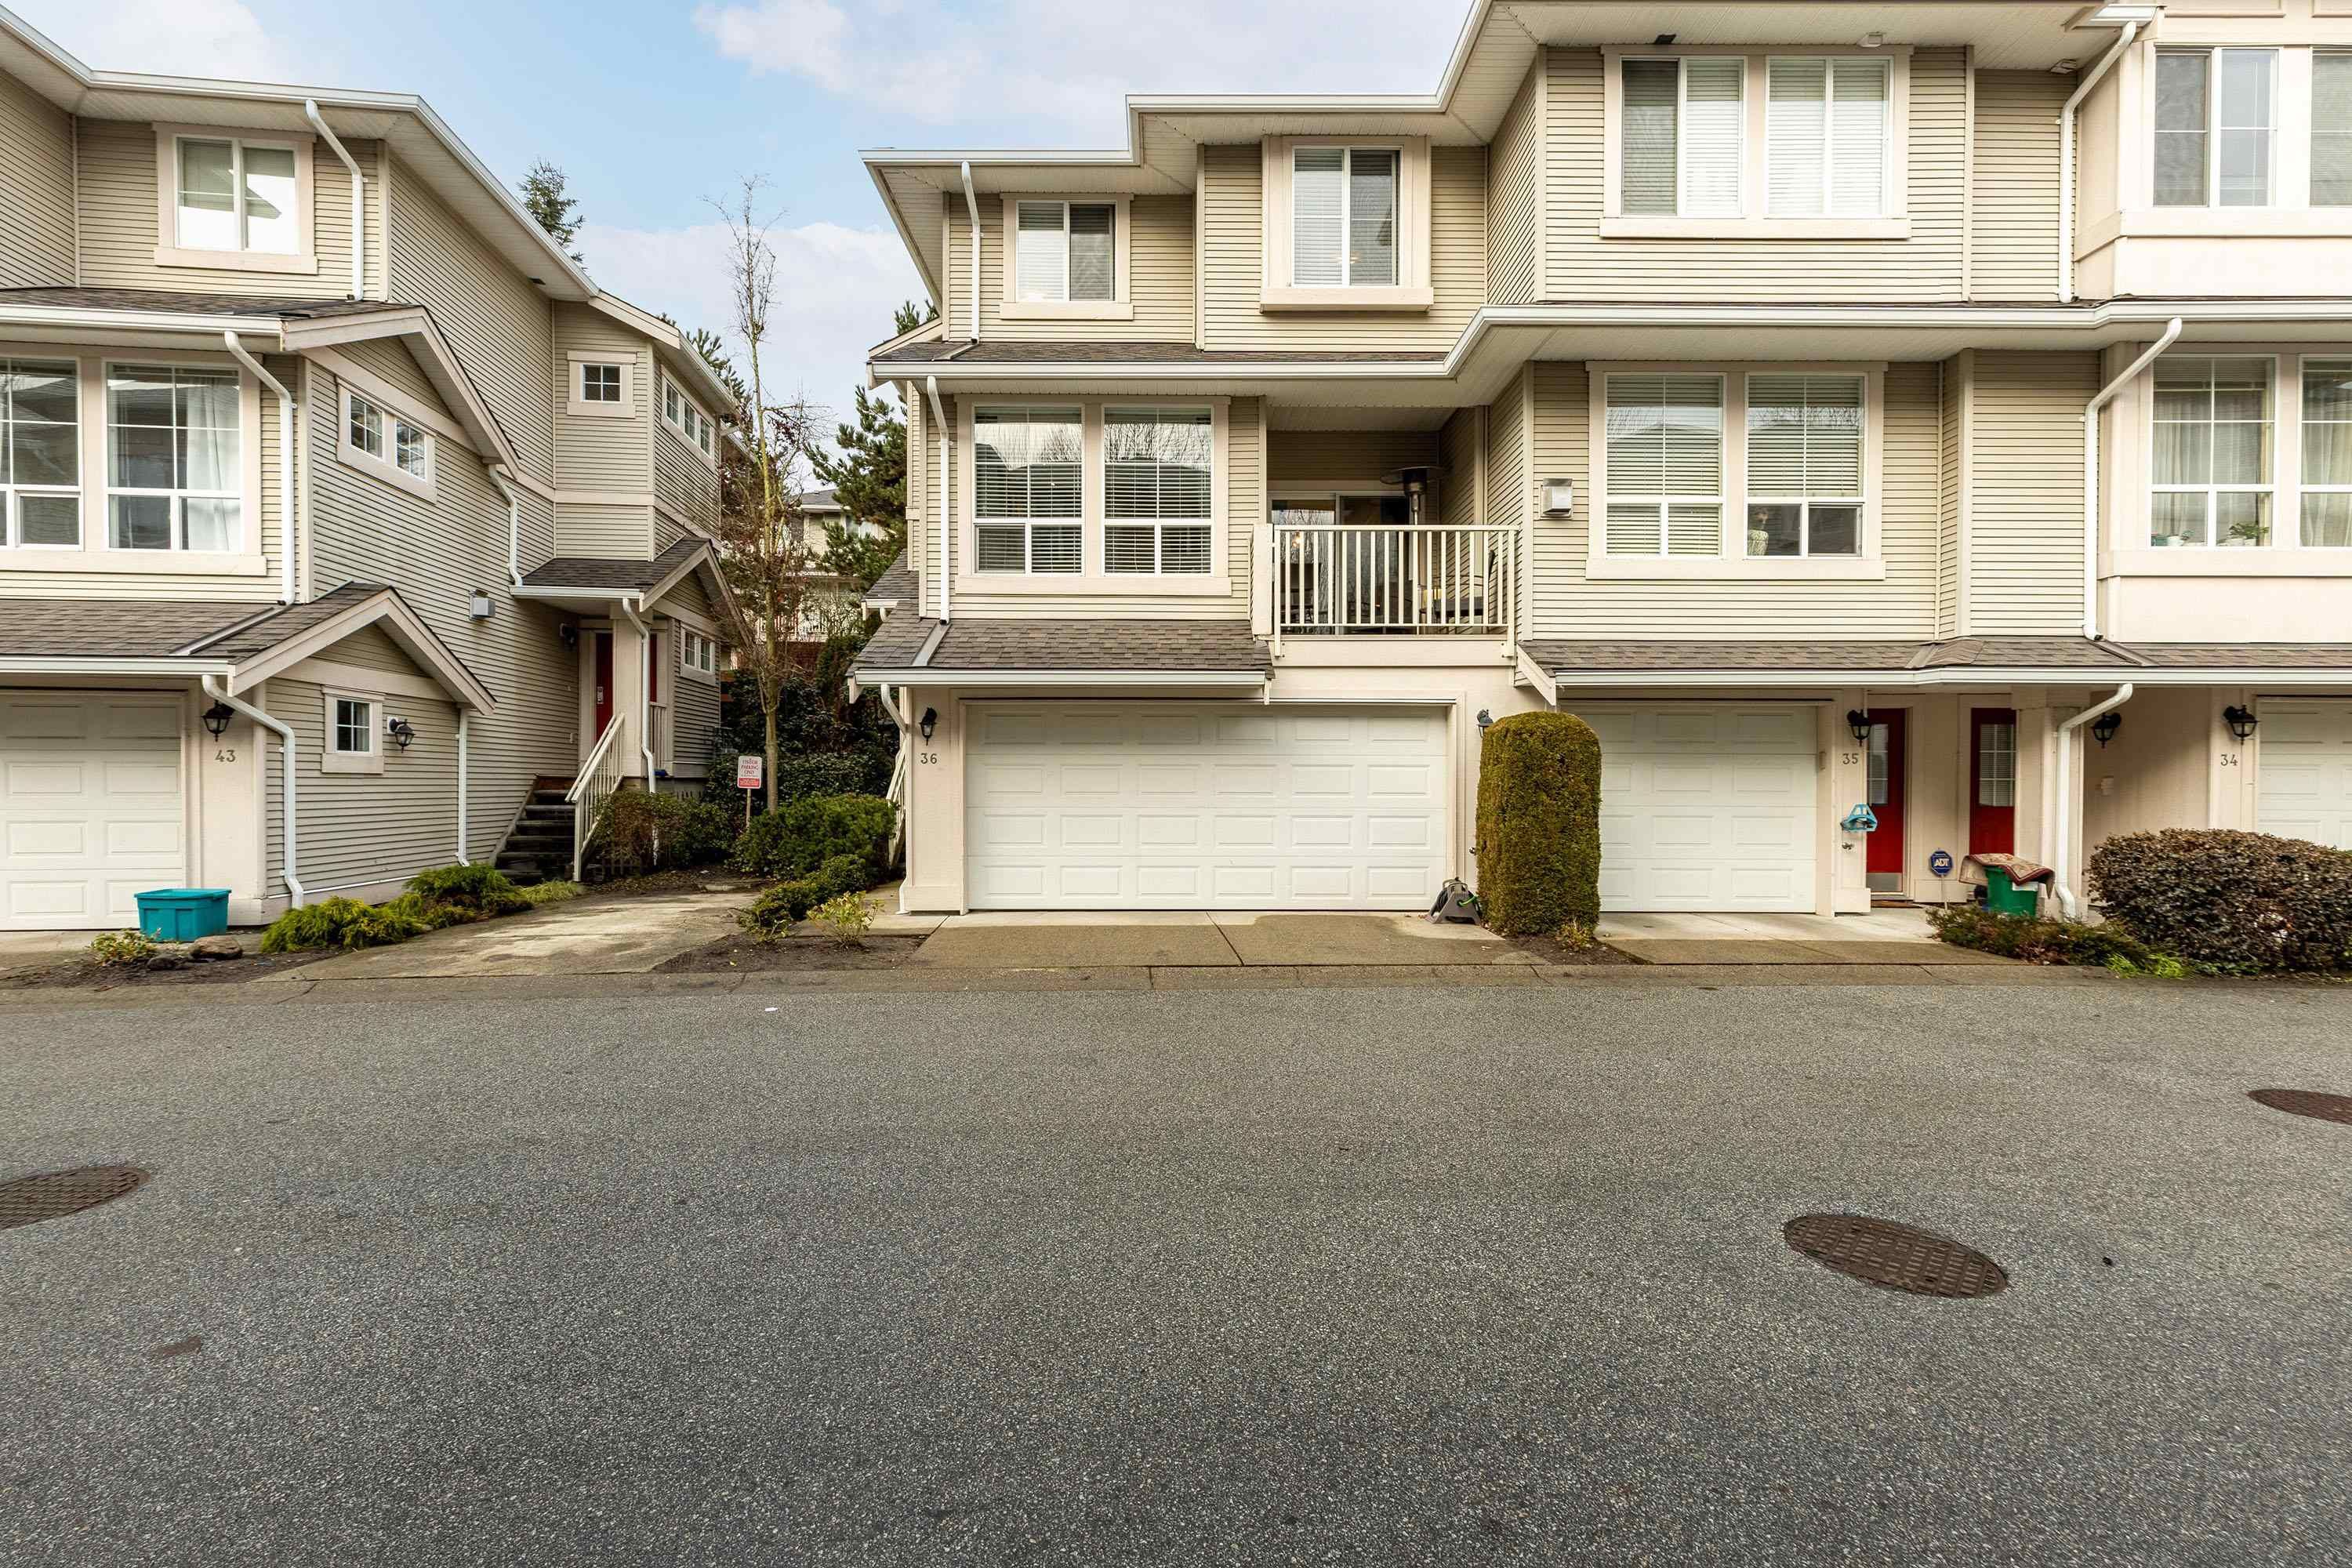 Main Photo: 36 14952 58 AVENUE in Surrey: Sullivan Station Townhouse for sale : MLS®# R2643962